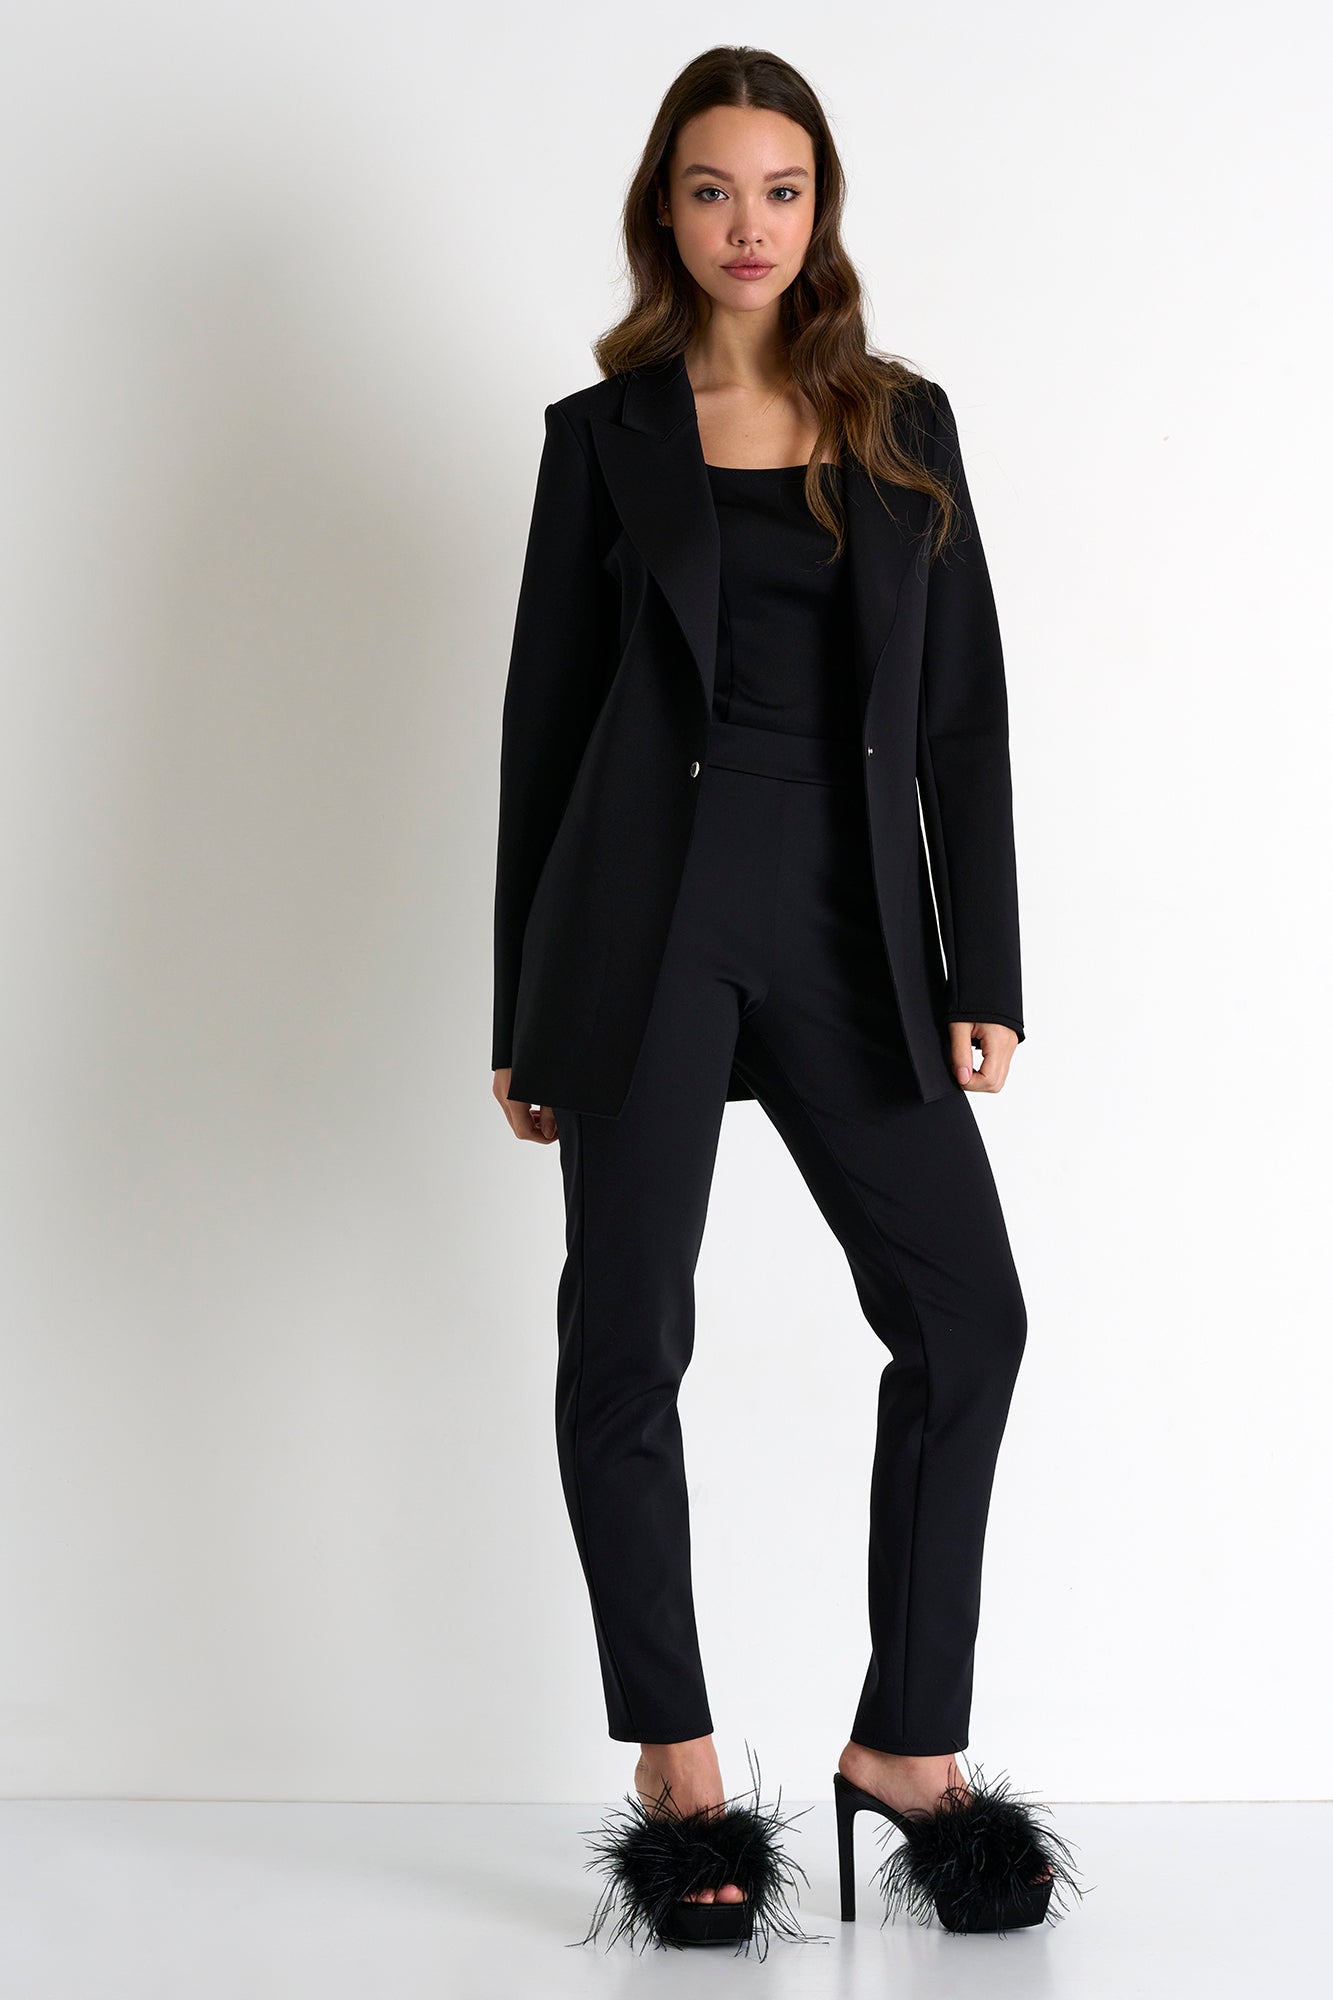 The Sofia Straight Trouser is the perfect choice for modern, sophisticated style. 